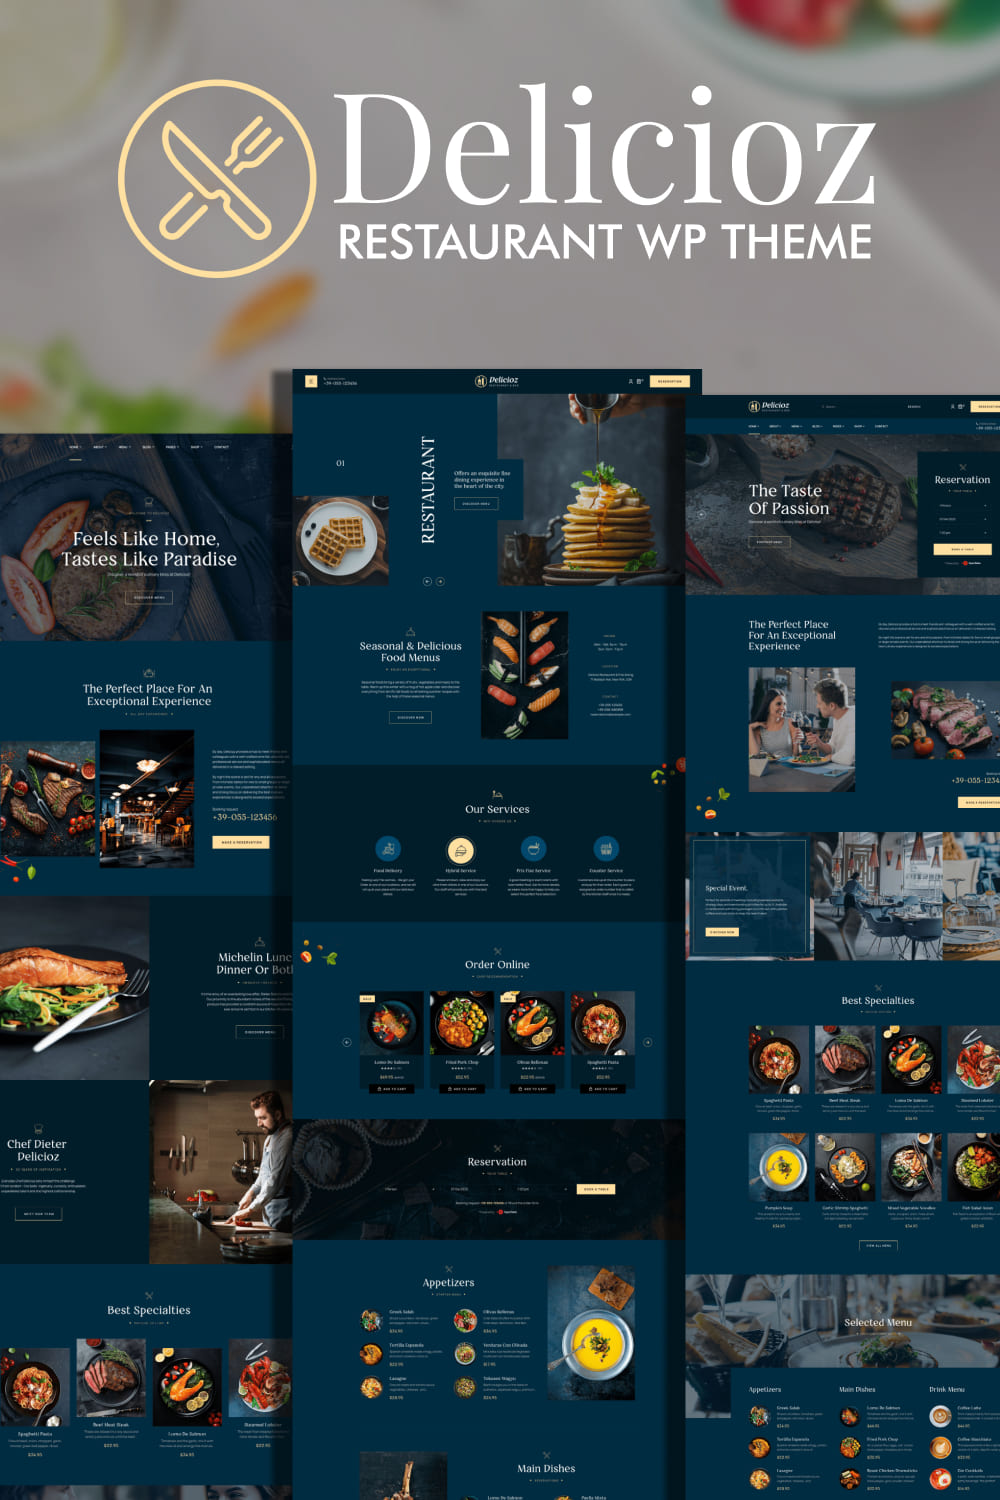 A collection of beautiful restaurant WordPress theme pages.